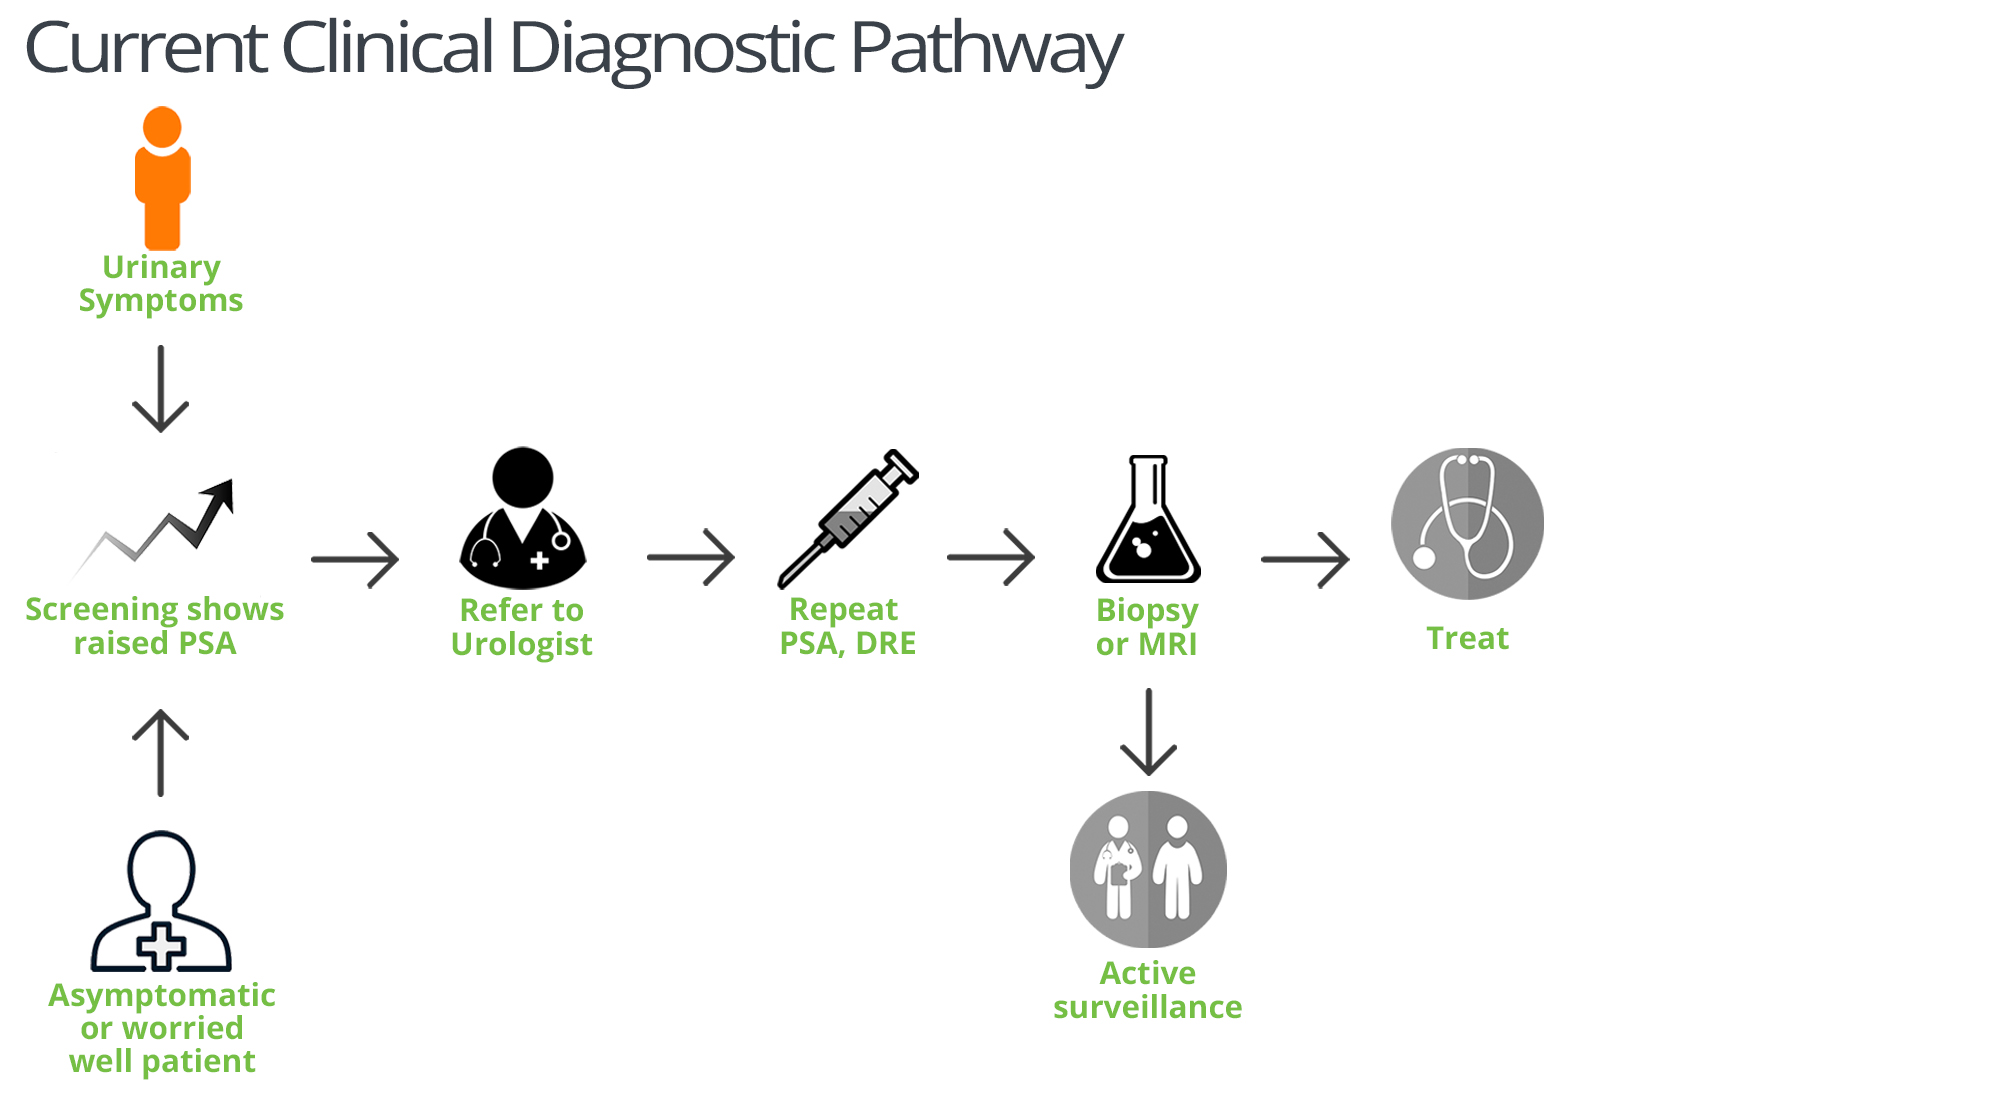 Current Clinical Prostate Cancer Diagnostic Pathway